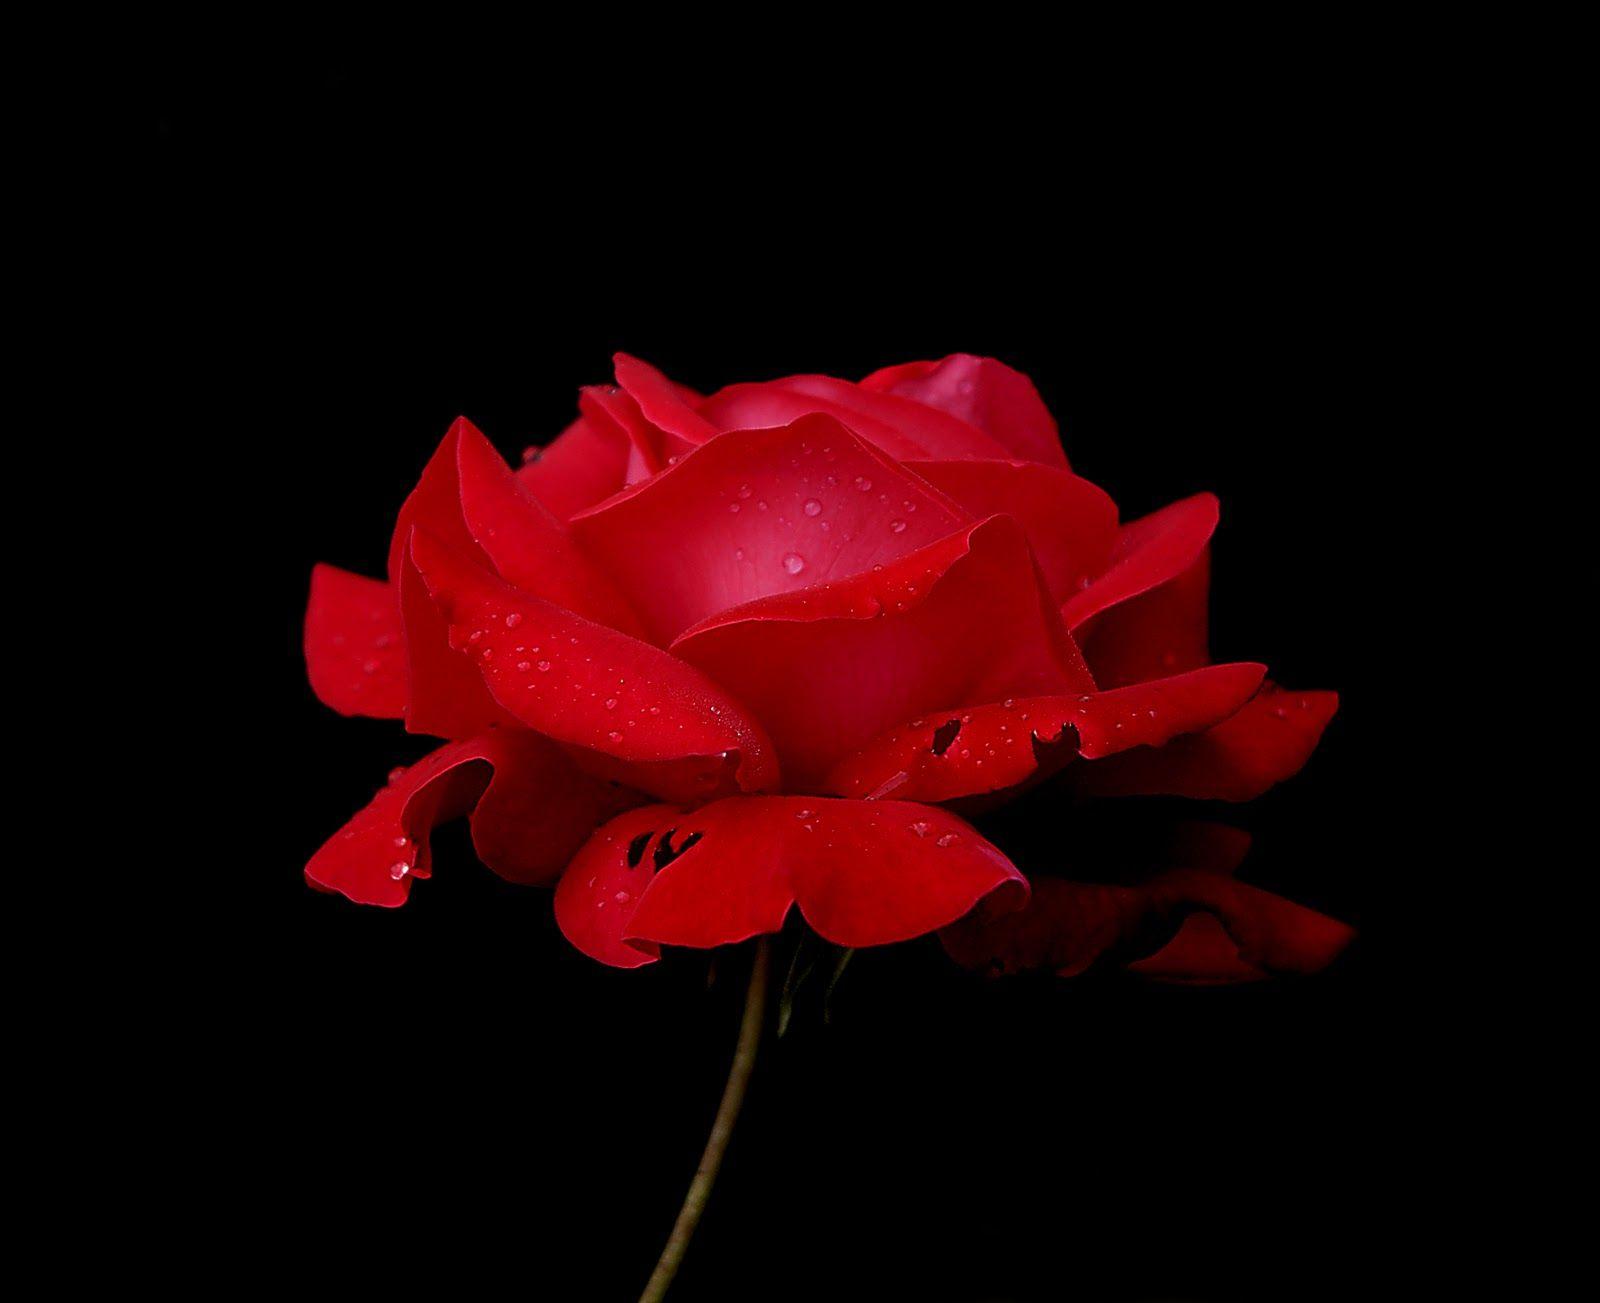 Red Rose With Black Background